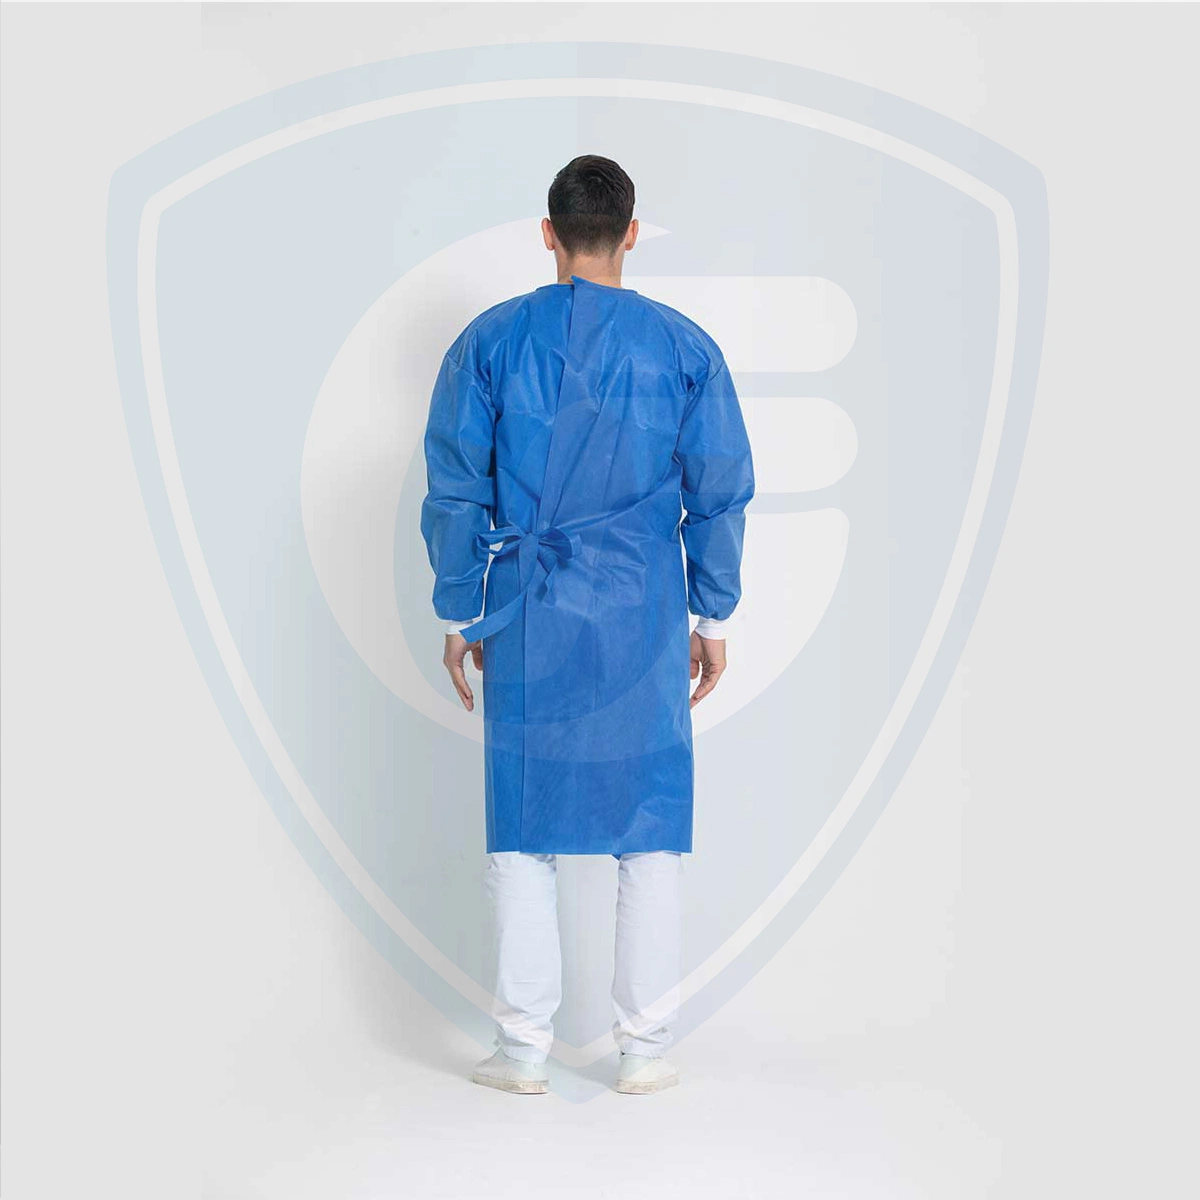 Disposable Blue SMS/Non-Woven Surgical/Isolation Gown Knitted Cuff Sterile Waterproof Hospital Operating Medical Supply